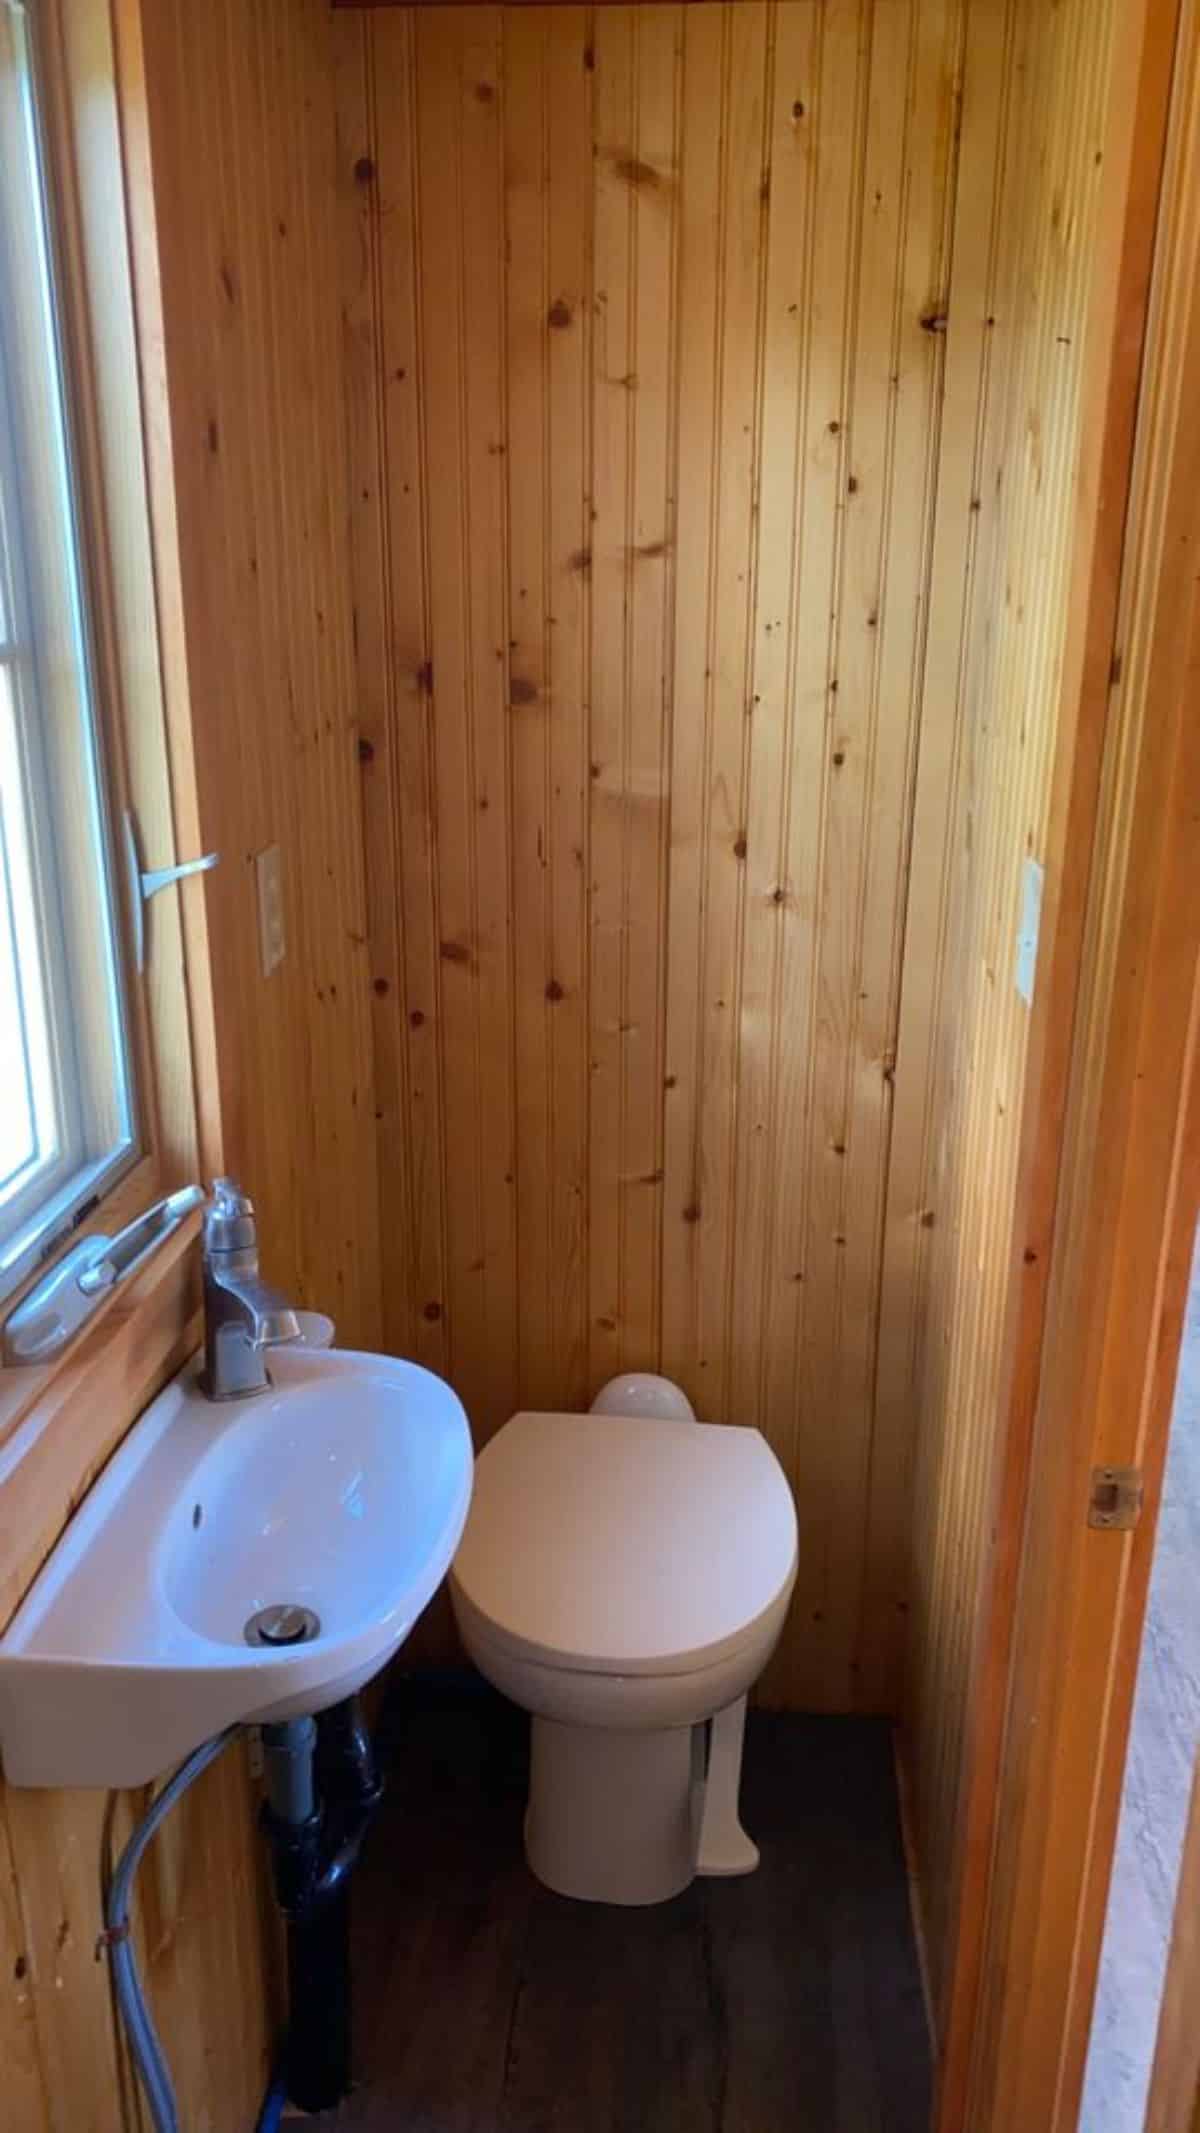 Standard toilet and sink in bathroom of 20’ Cozy Tiny House